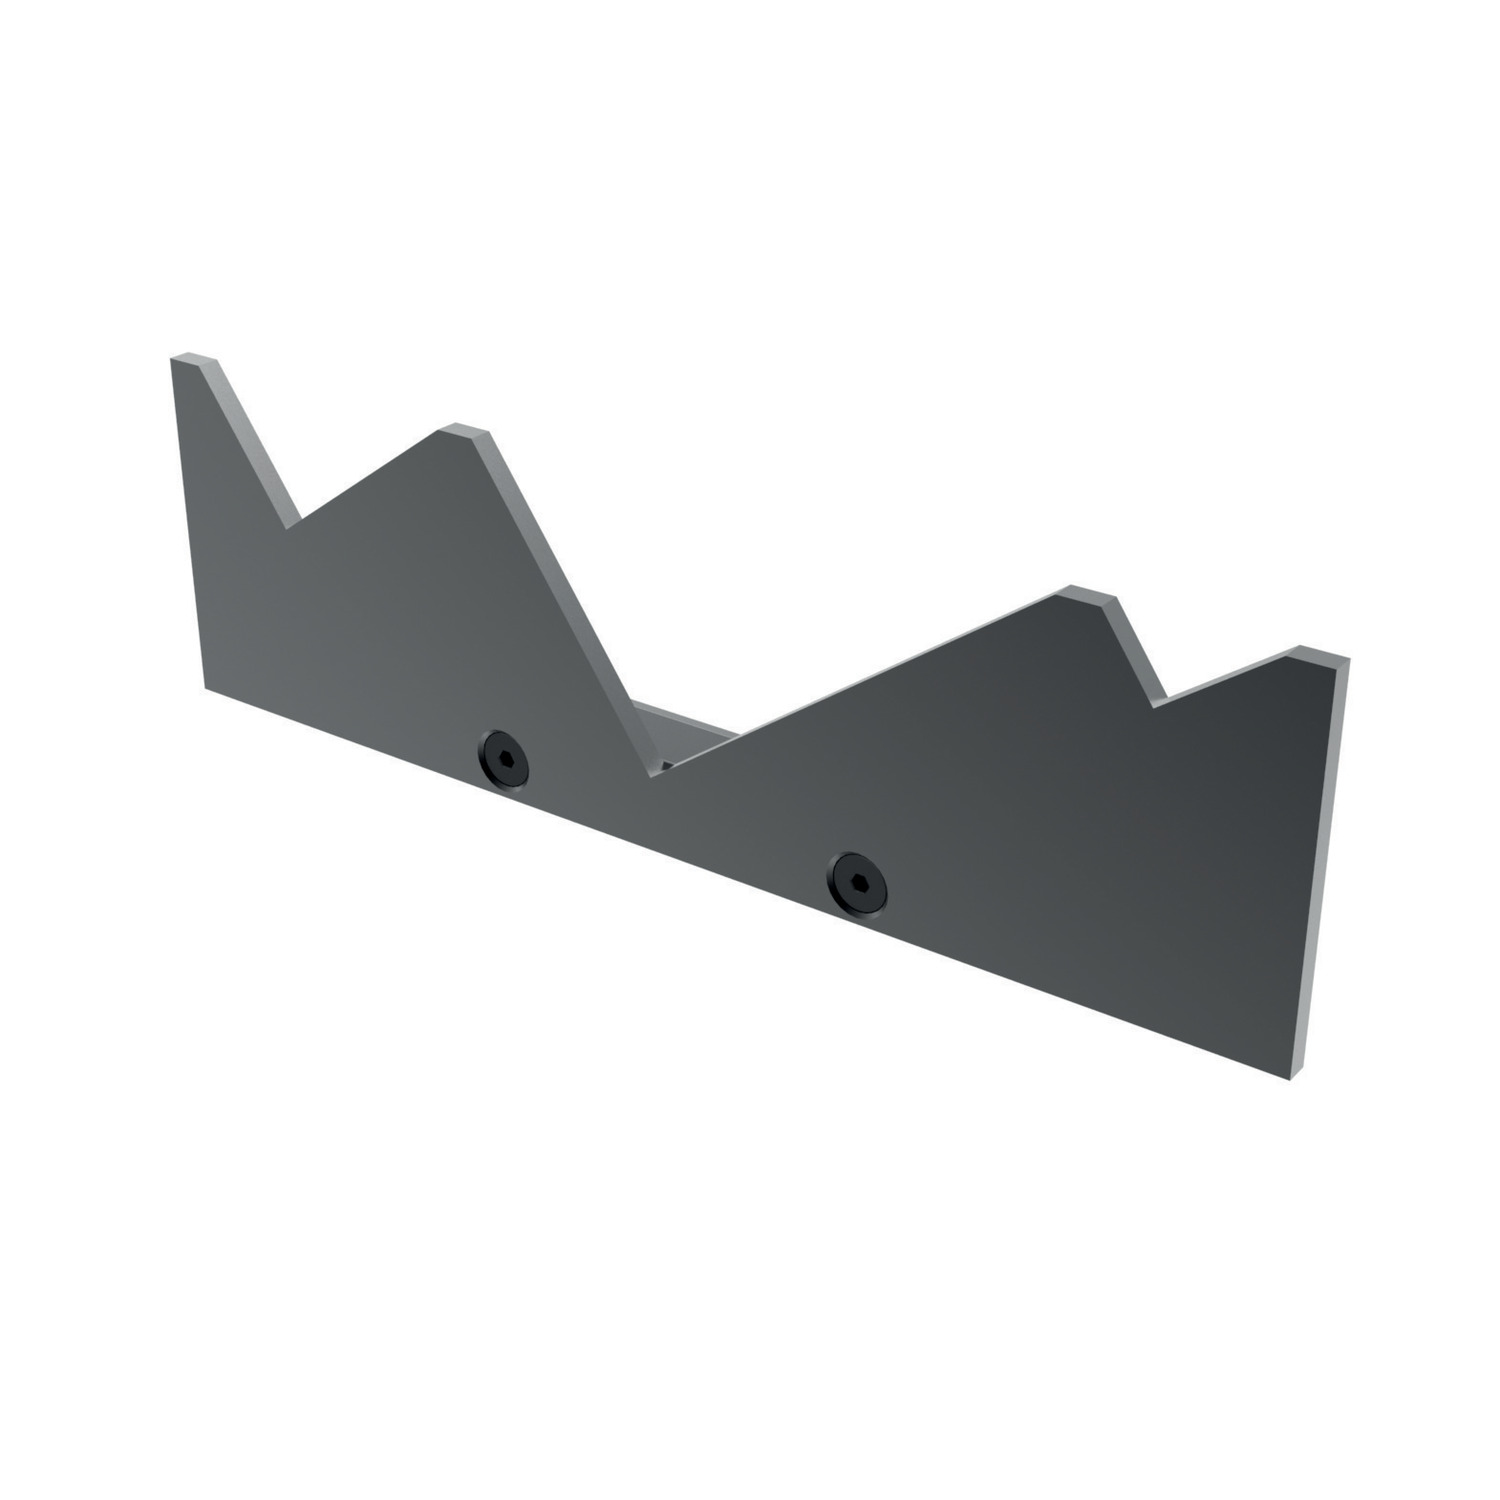 Product 19856, Vice Mill Angles - QuickChange for use with QuickChange master jaws 19850 / 